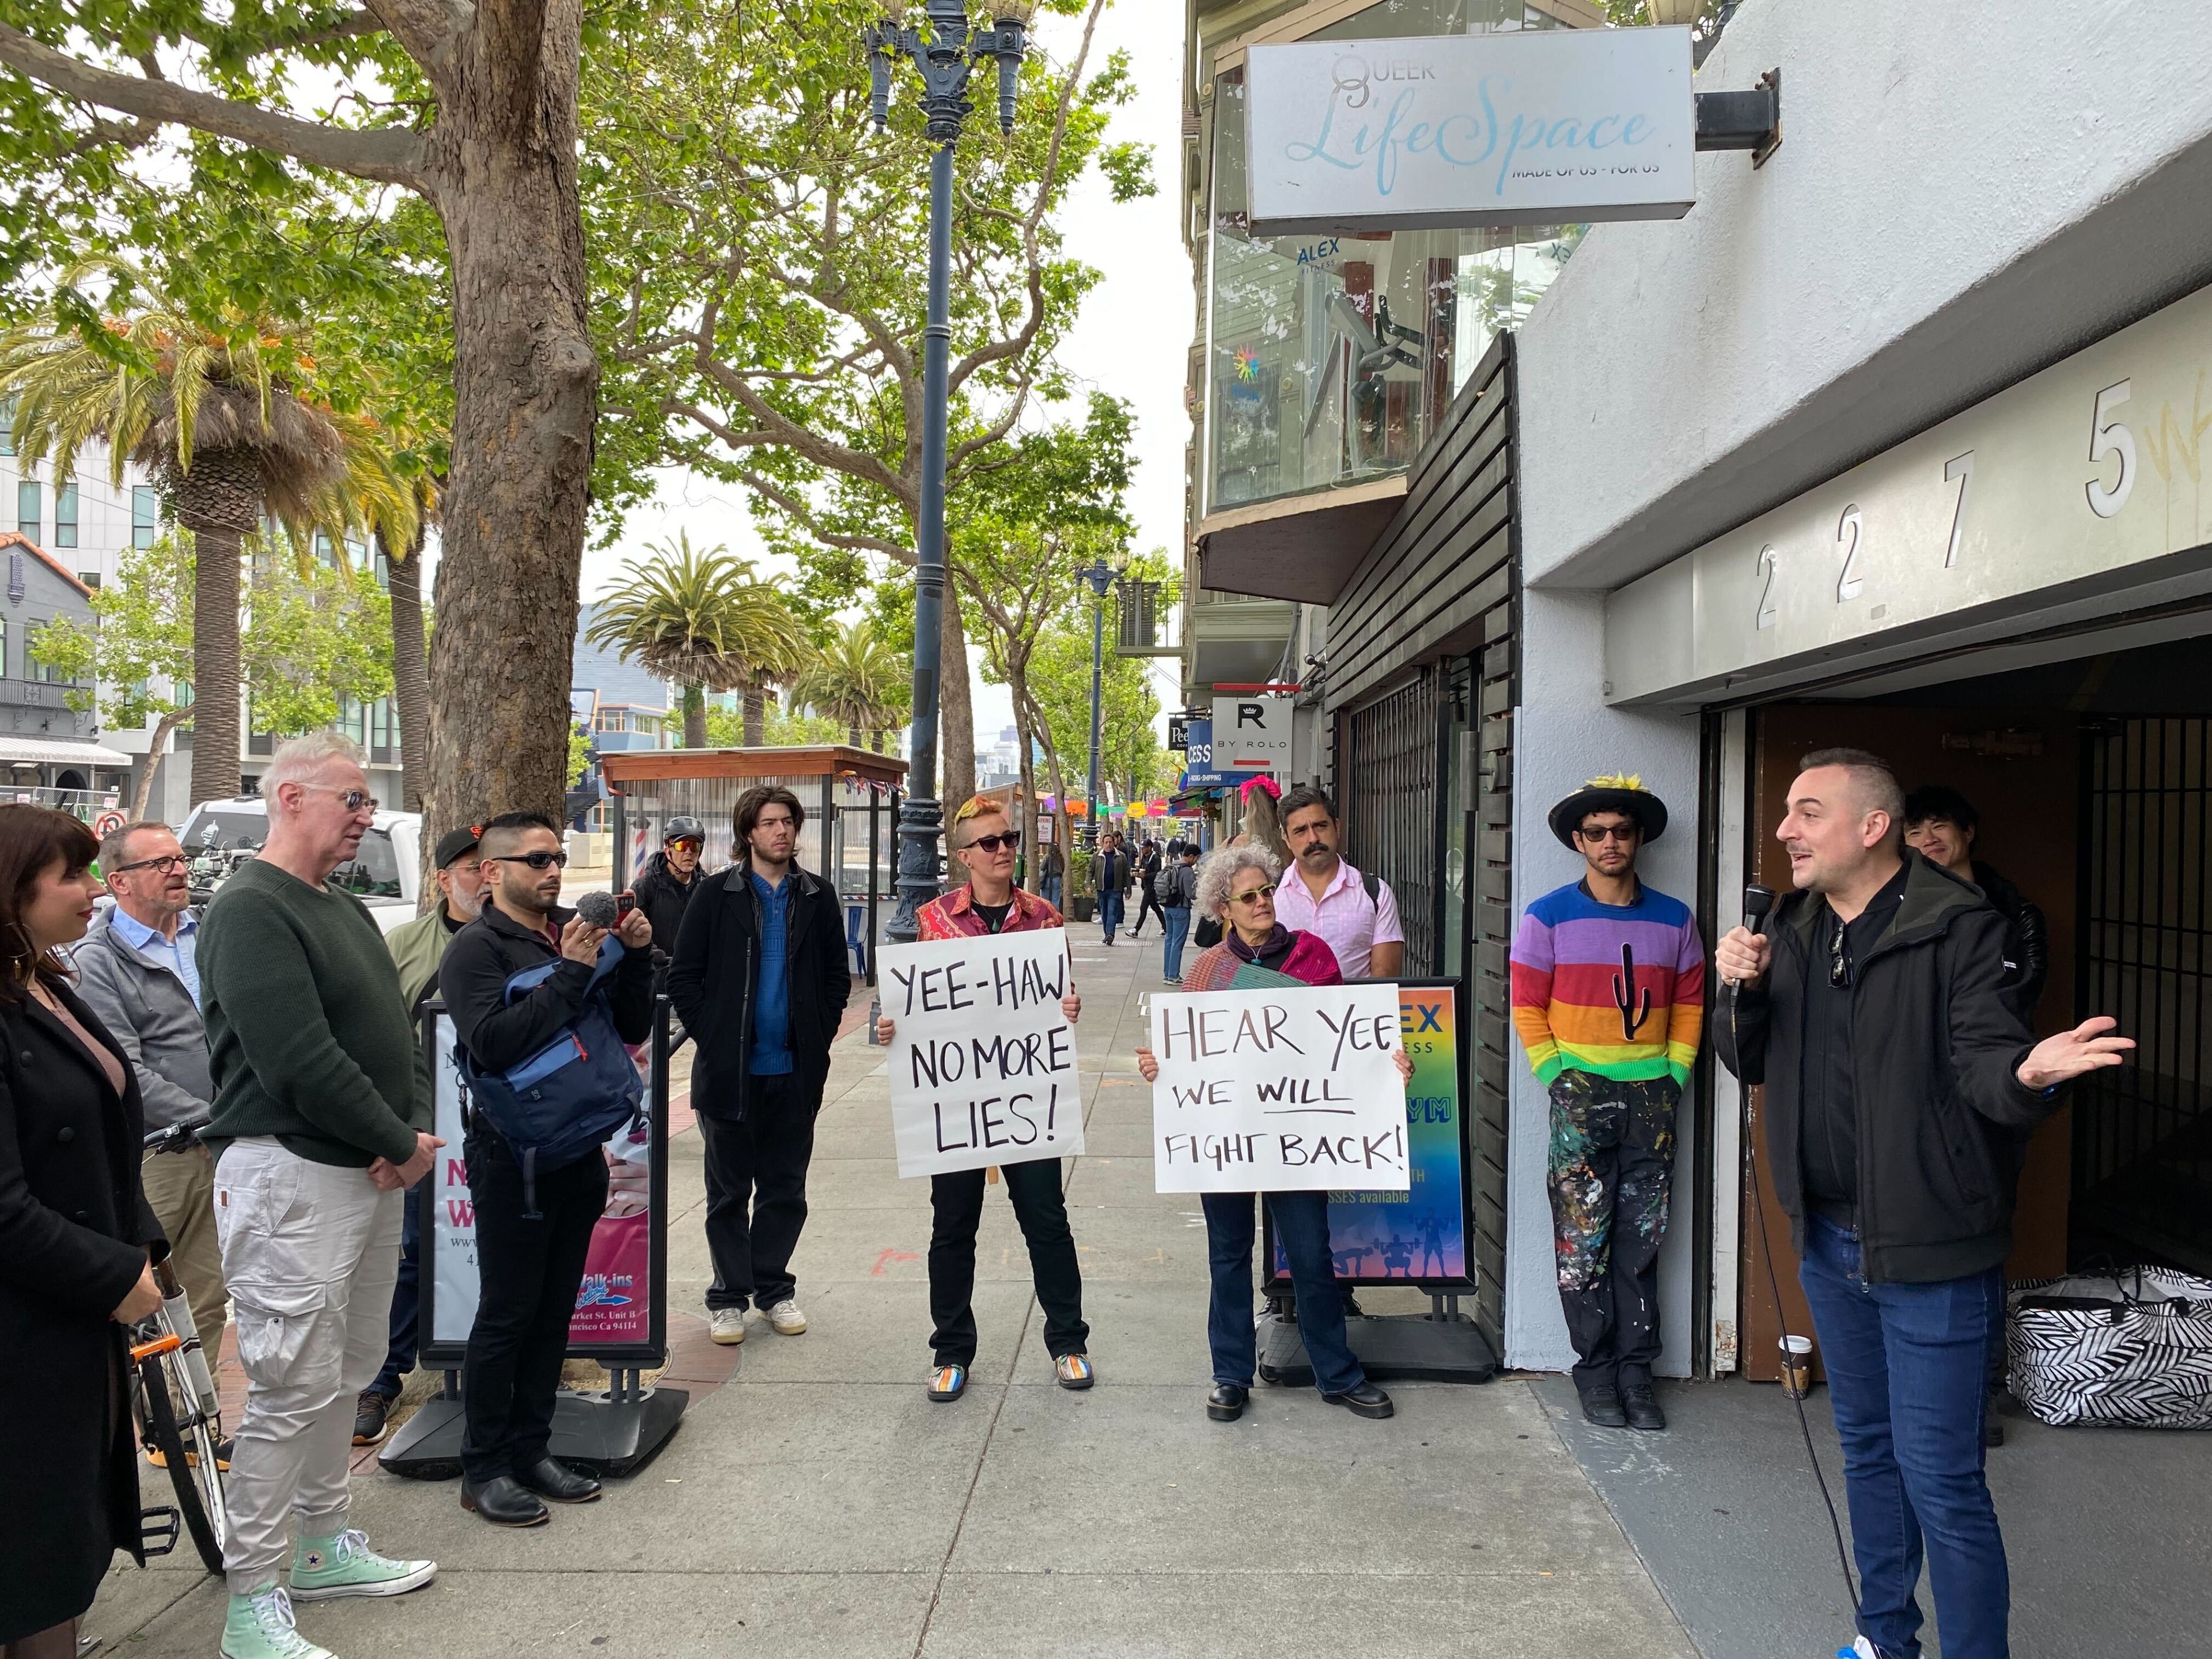 A group of people watches a man speaking into a microphone on a city sidewalk, flanked by two holding protest signs with slogans about truth.